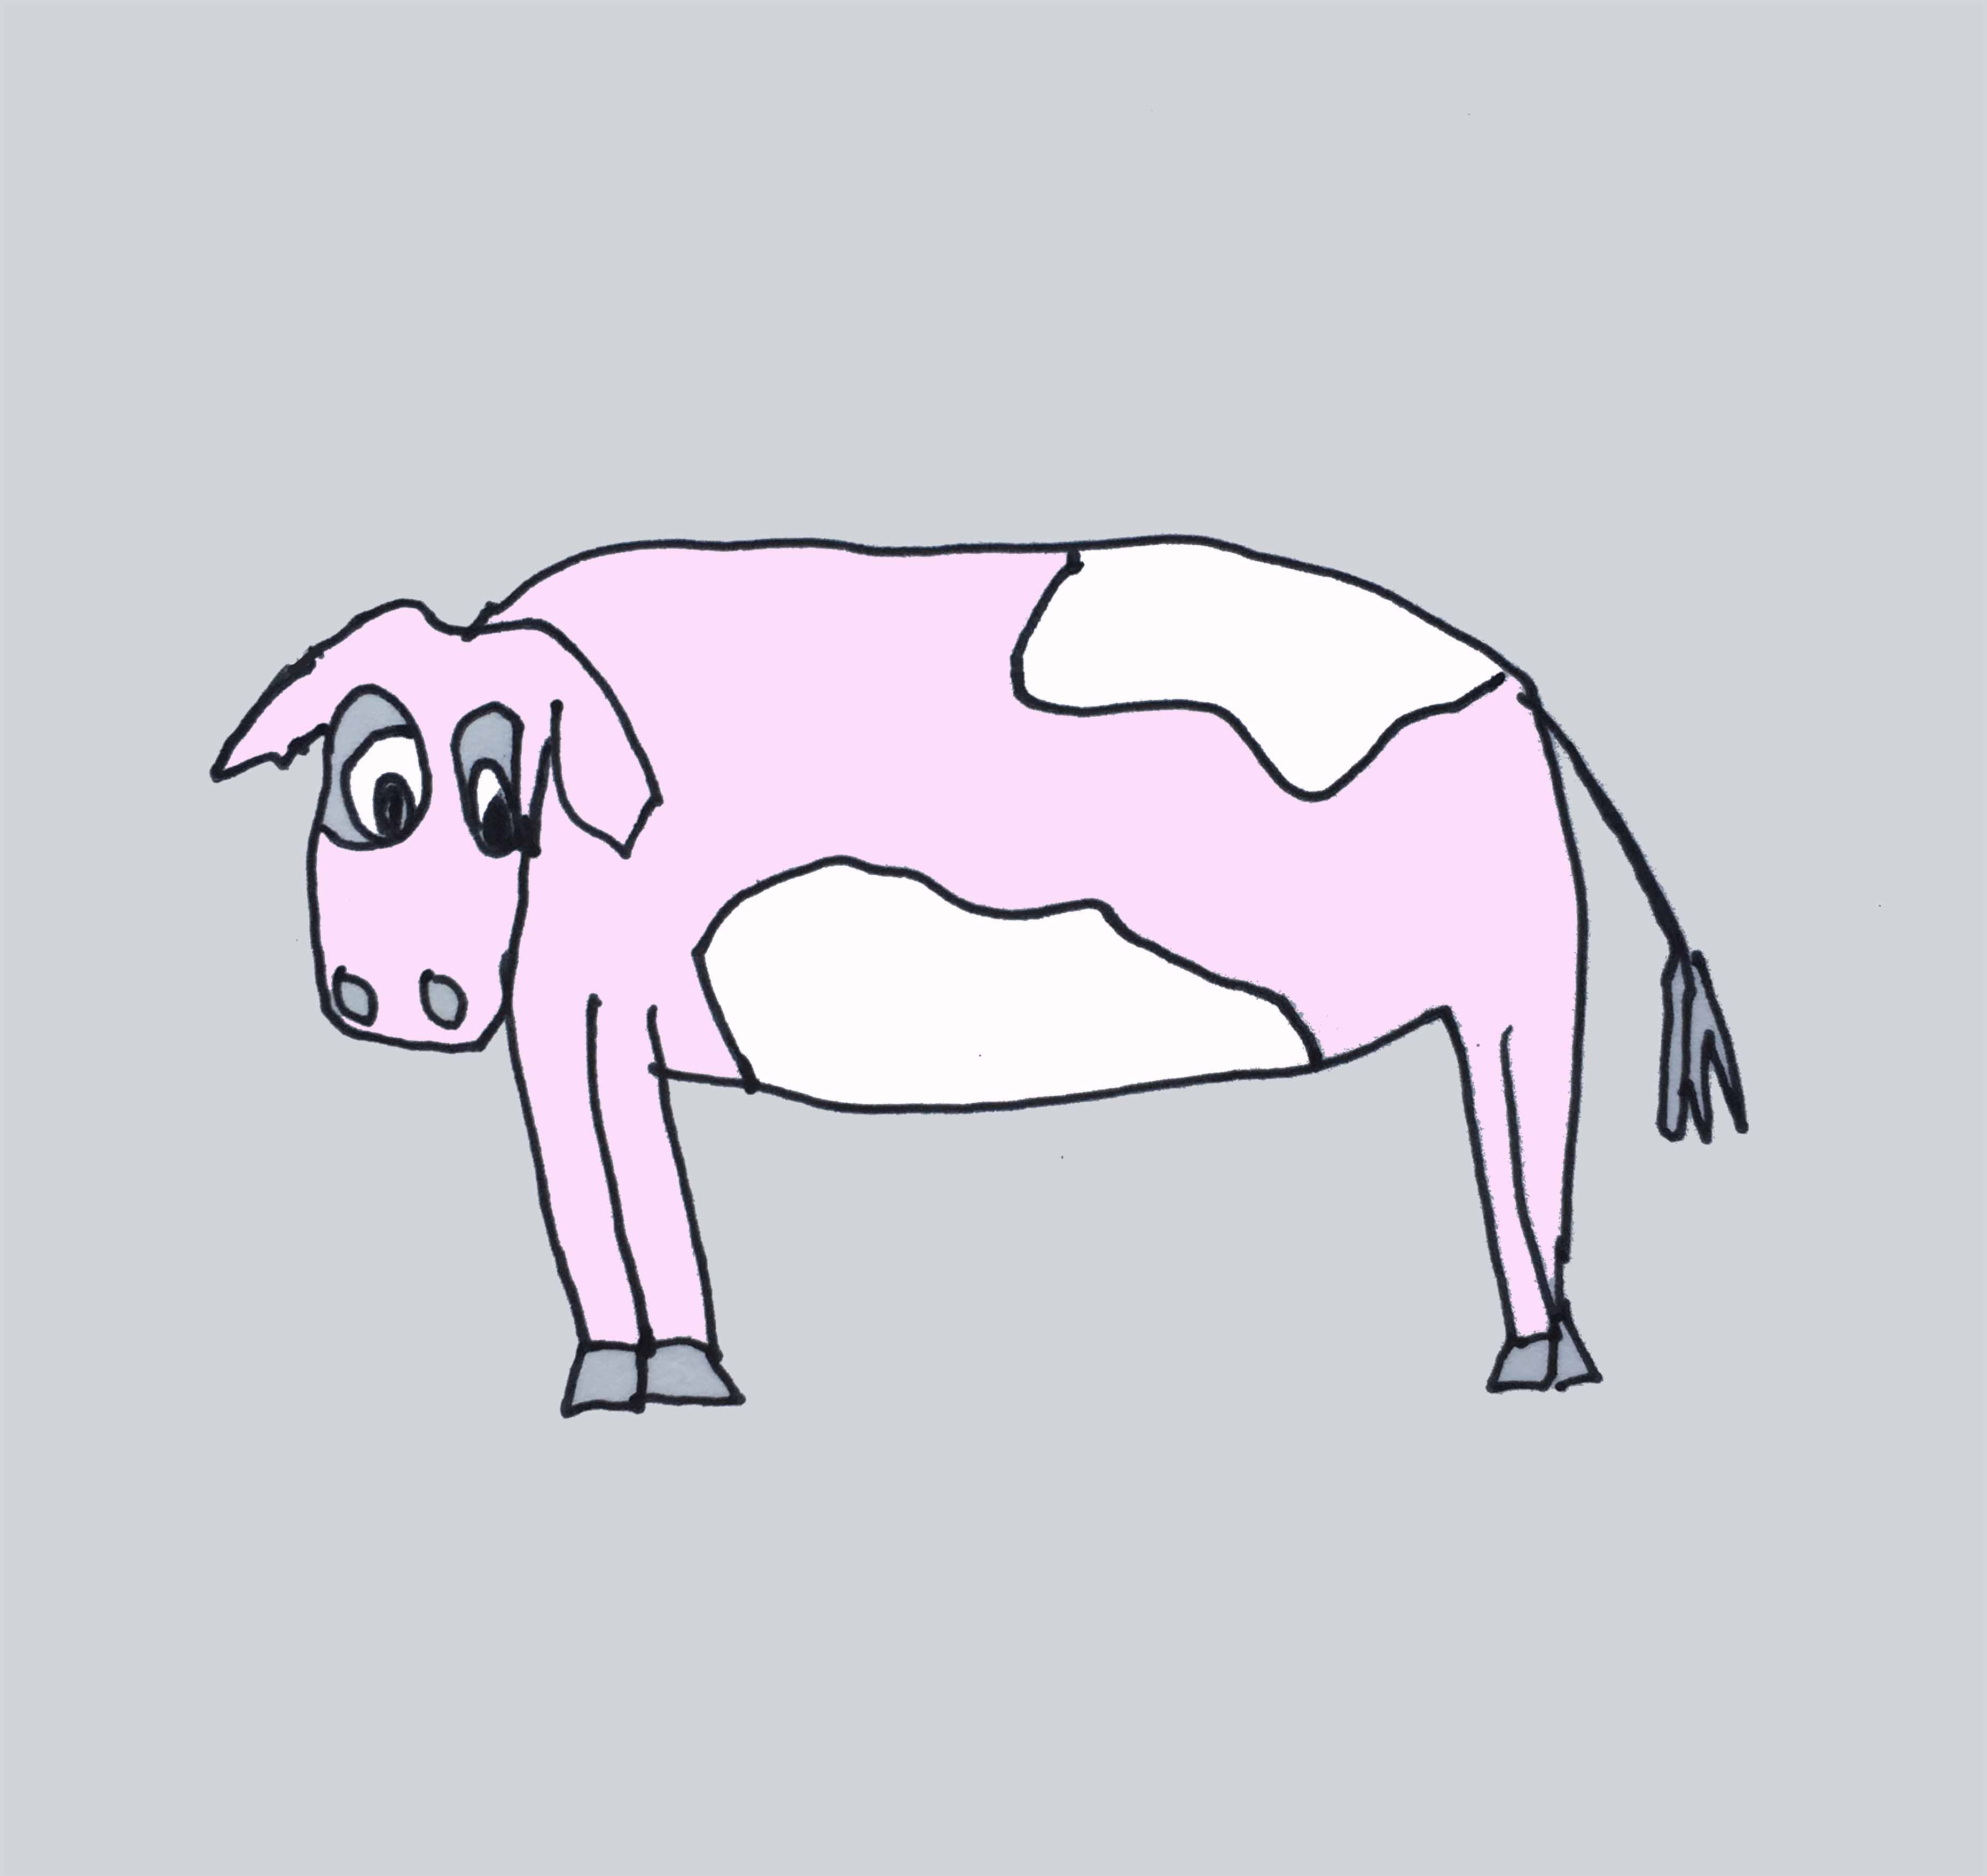 art every day number 161 / illustration / drawing / the friendly cow